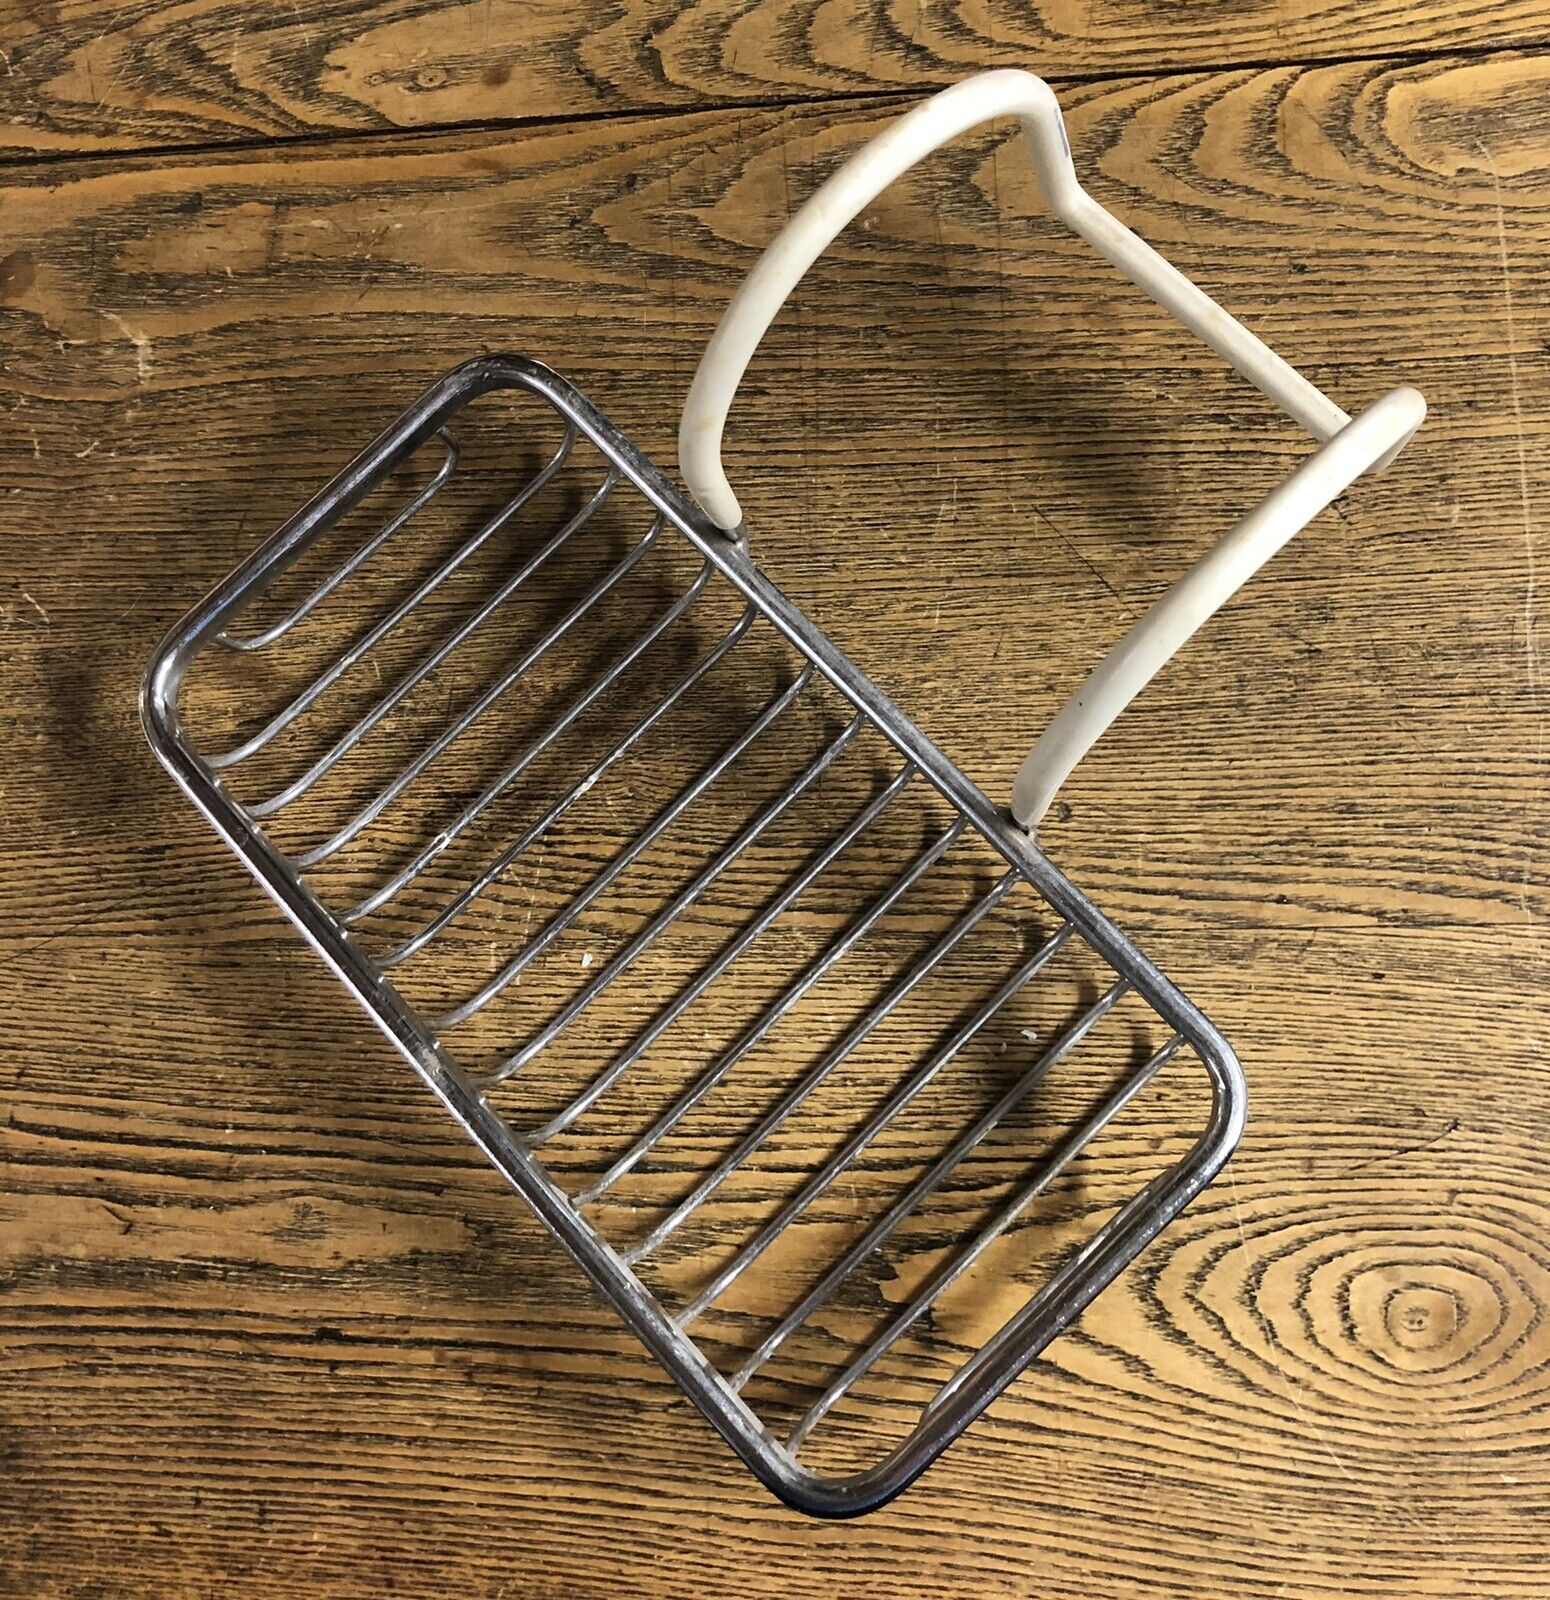 Large Vintage Chrome Wire Clawfoot Tub Soap/Sponge Holder With Vinyl Coated Arms